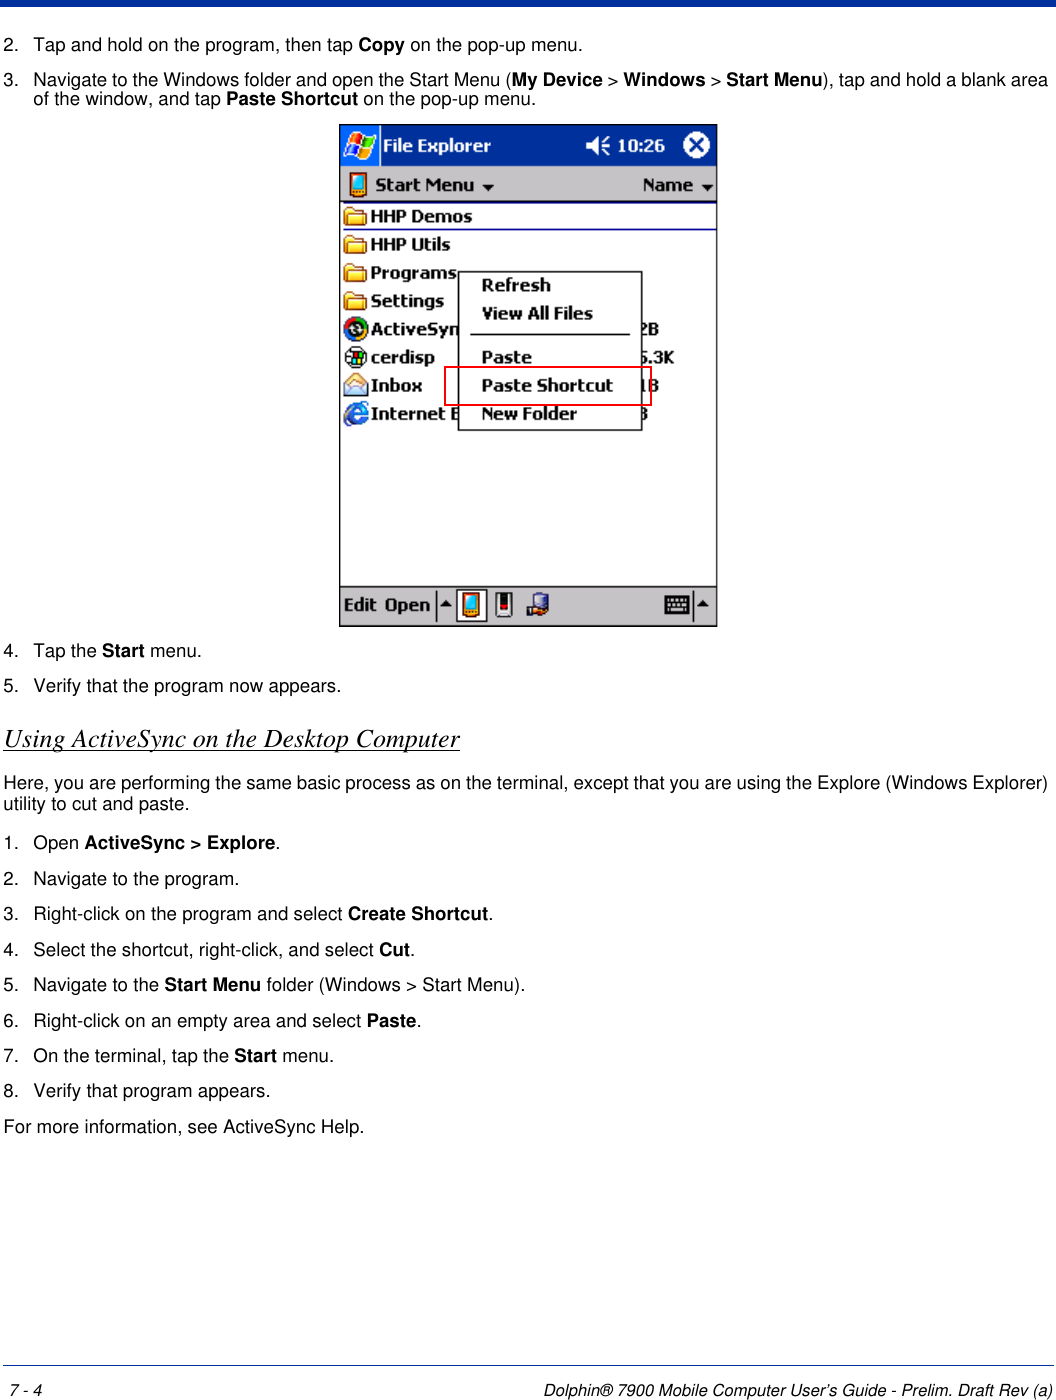 7 - 4 Dolphin® 7900 Mobile Computer User’s Guide - Prelim. Draft Rev (a)2. Tap and hold on the program, then tap Copy on the pop-up menu. 3. Navigate to the Windows folder and open the Start Menu (My Device &gt; Windows &gt; Start Menu), tap and hold a blank area of the window, and tap Paste Shortcut on the pop-up menu. 4. Tap the Start menu.5. Verify that the program now appears.Using ActiveSync on the Desktop ComputerHere, you are performing the same basic process as on the terminal, except that you are using the Explore (Windows Explorer) utility to cut and paste.1. Open ActiveSync &gt; Explore.2. Navigate to the program.3. Right-click on the program and select Create Shortcut. 4. Select the shortcut, right-click, and select Cut.5. Navigate to the Start Menu folder (Windows &gt; Start Menu).6. Right-click on an empty area and select Paste. 7. On the terminal, tap the Start menu.8. Verify that program appears. For more information, see ActiveSync Help.